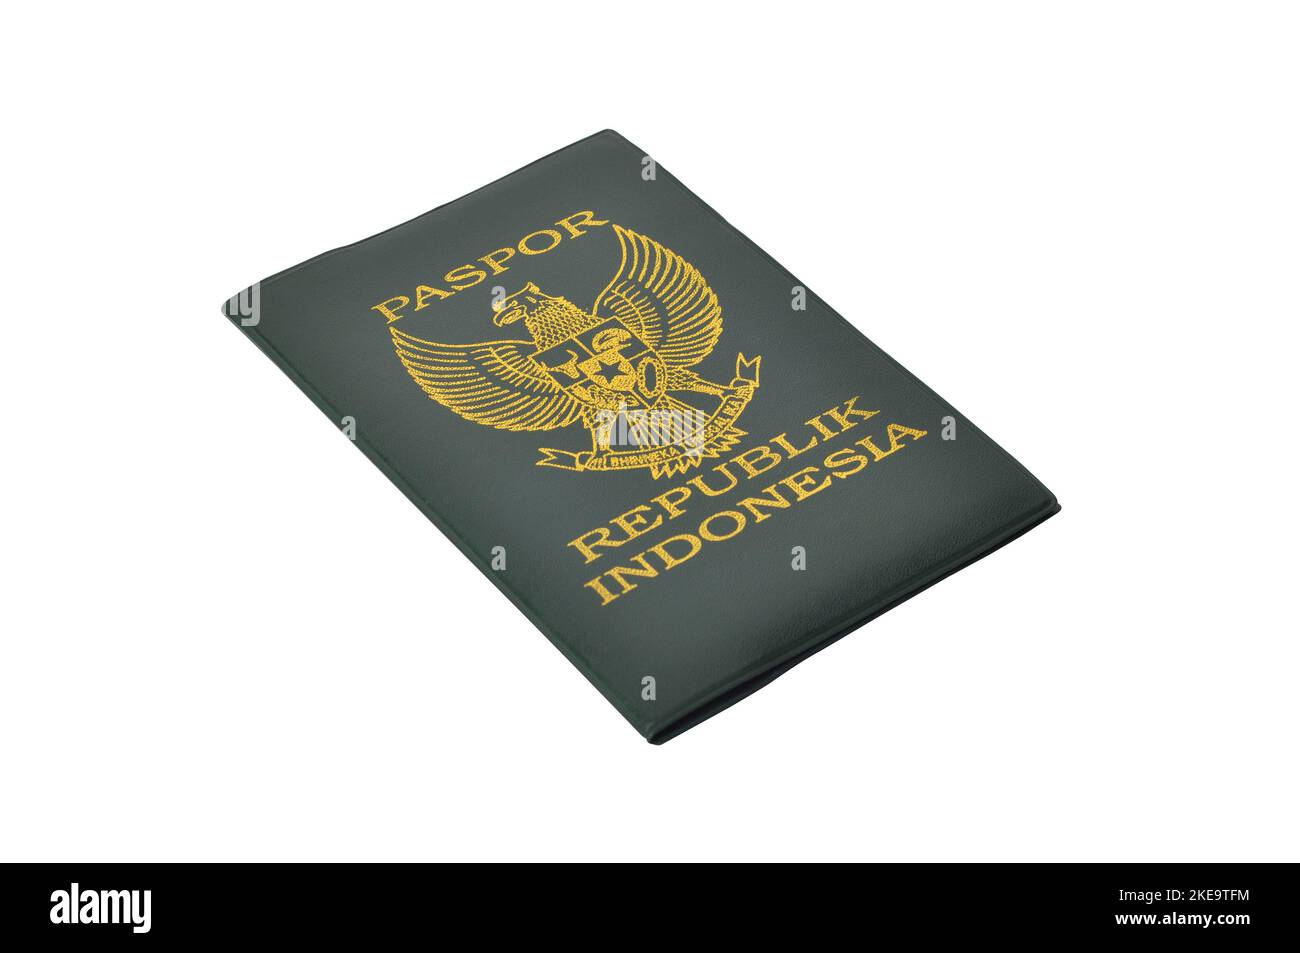 Republic of Indonesia passport book with green cover on white background Stock Photo